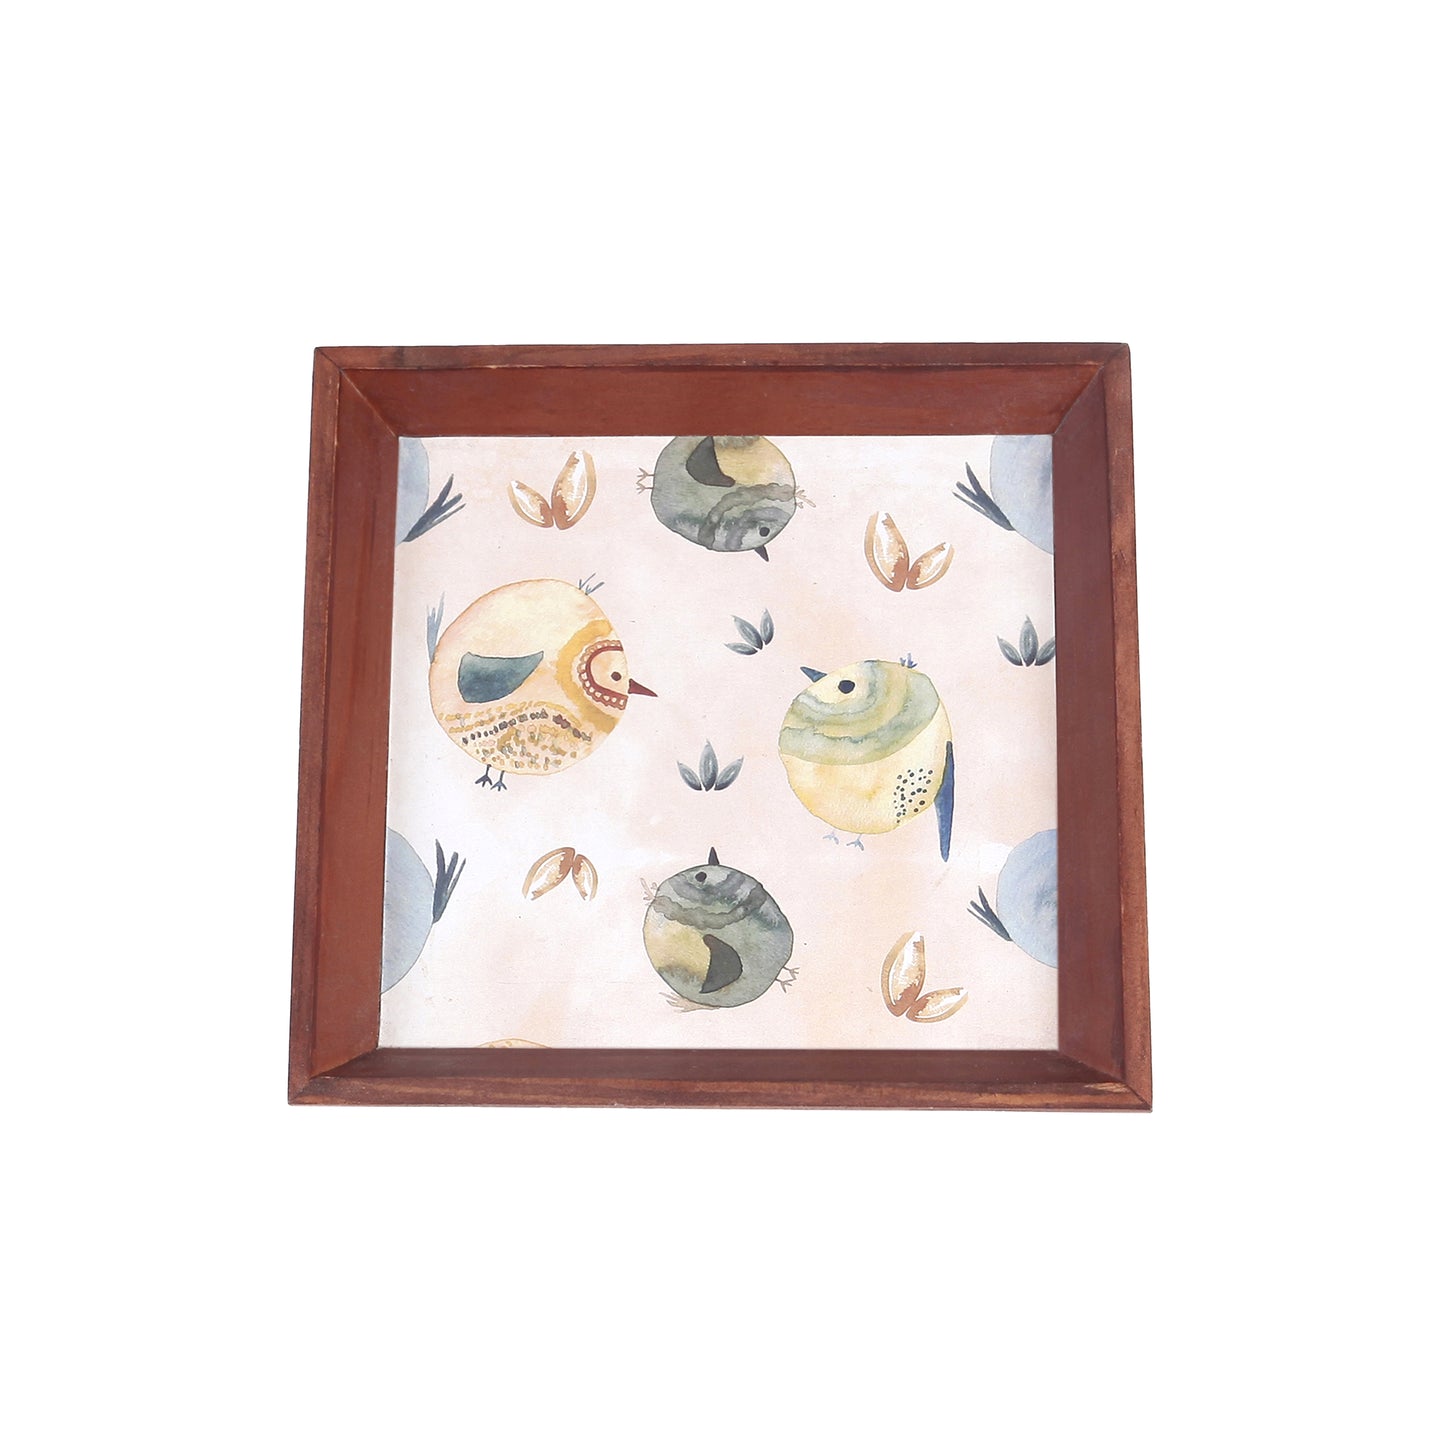 A Tiny Mistake Cute Birds Small Square Wooden Serving Tray, 18 x 18 x 2 cm